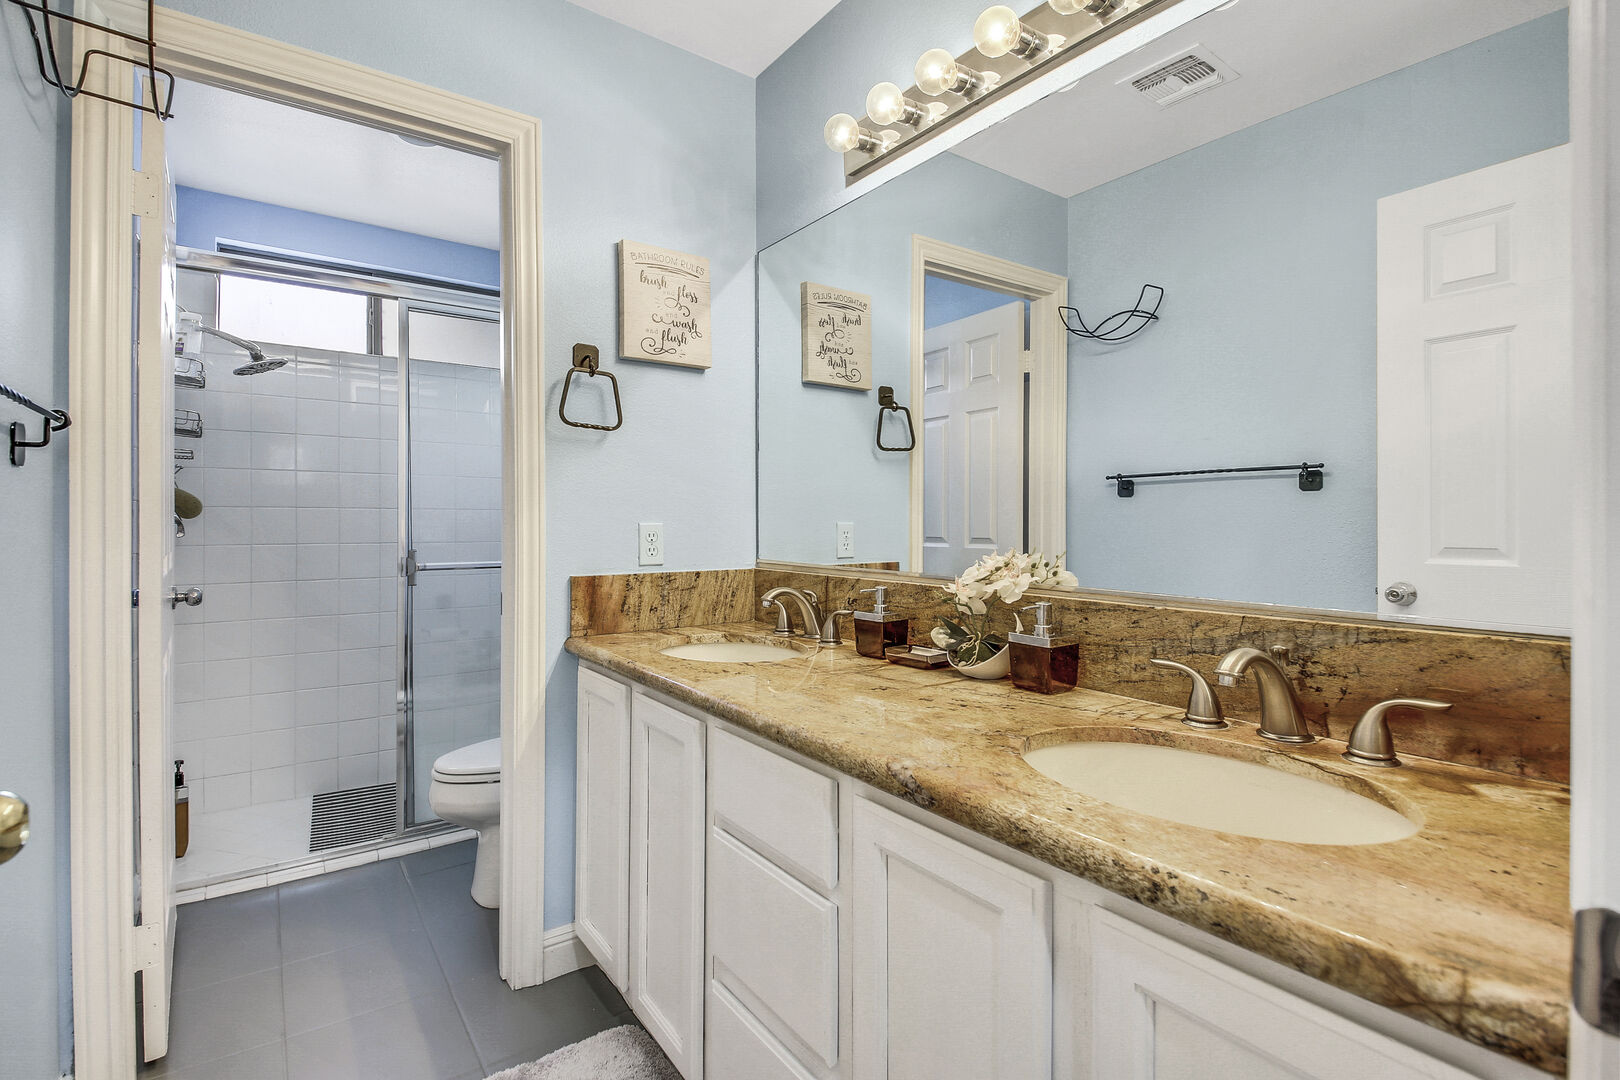 The downstairs hallway bathroom is located by the garage and features a tile shower and double vanity sinks.